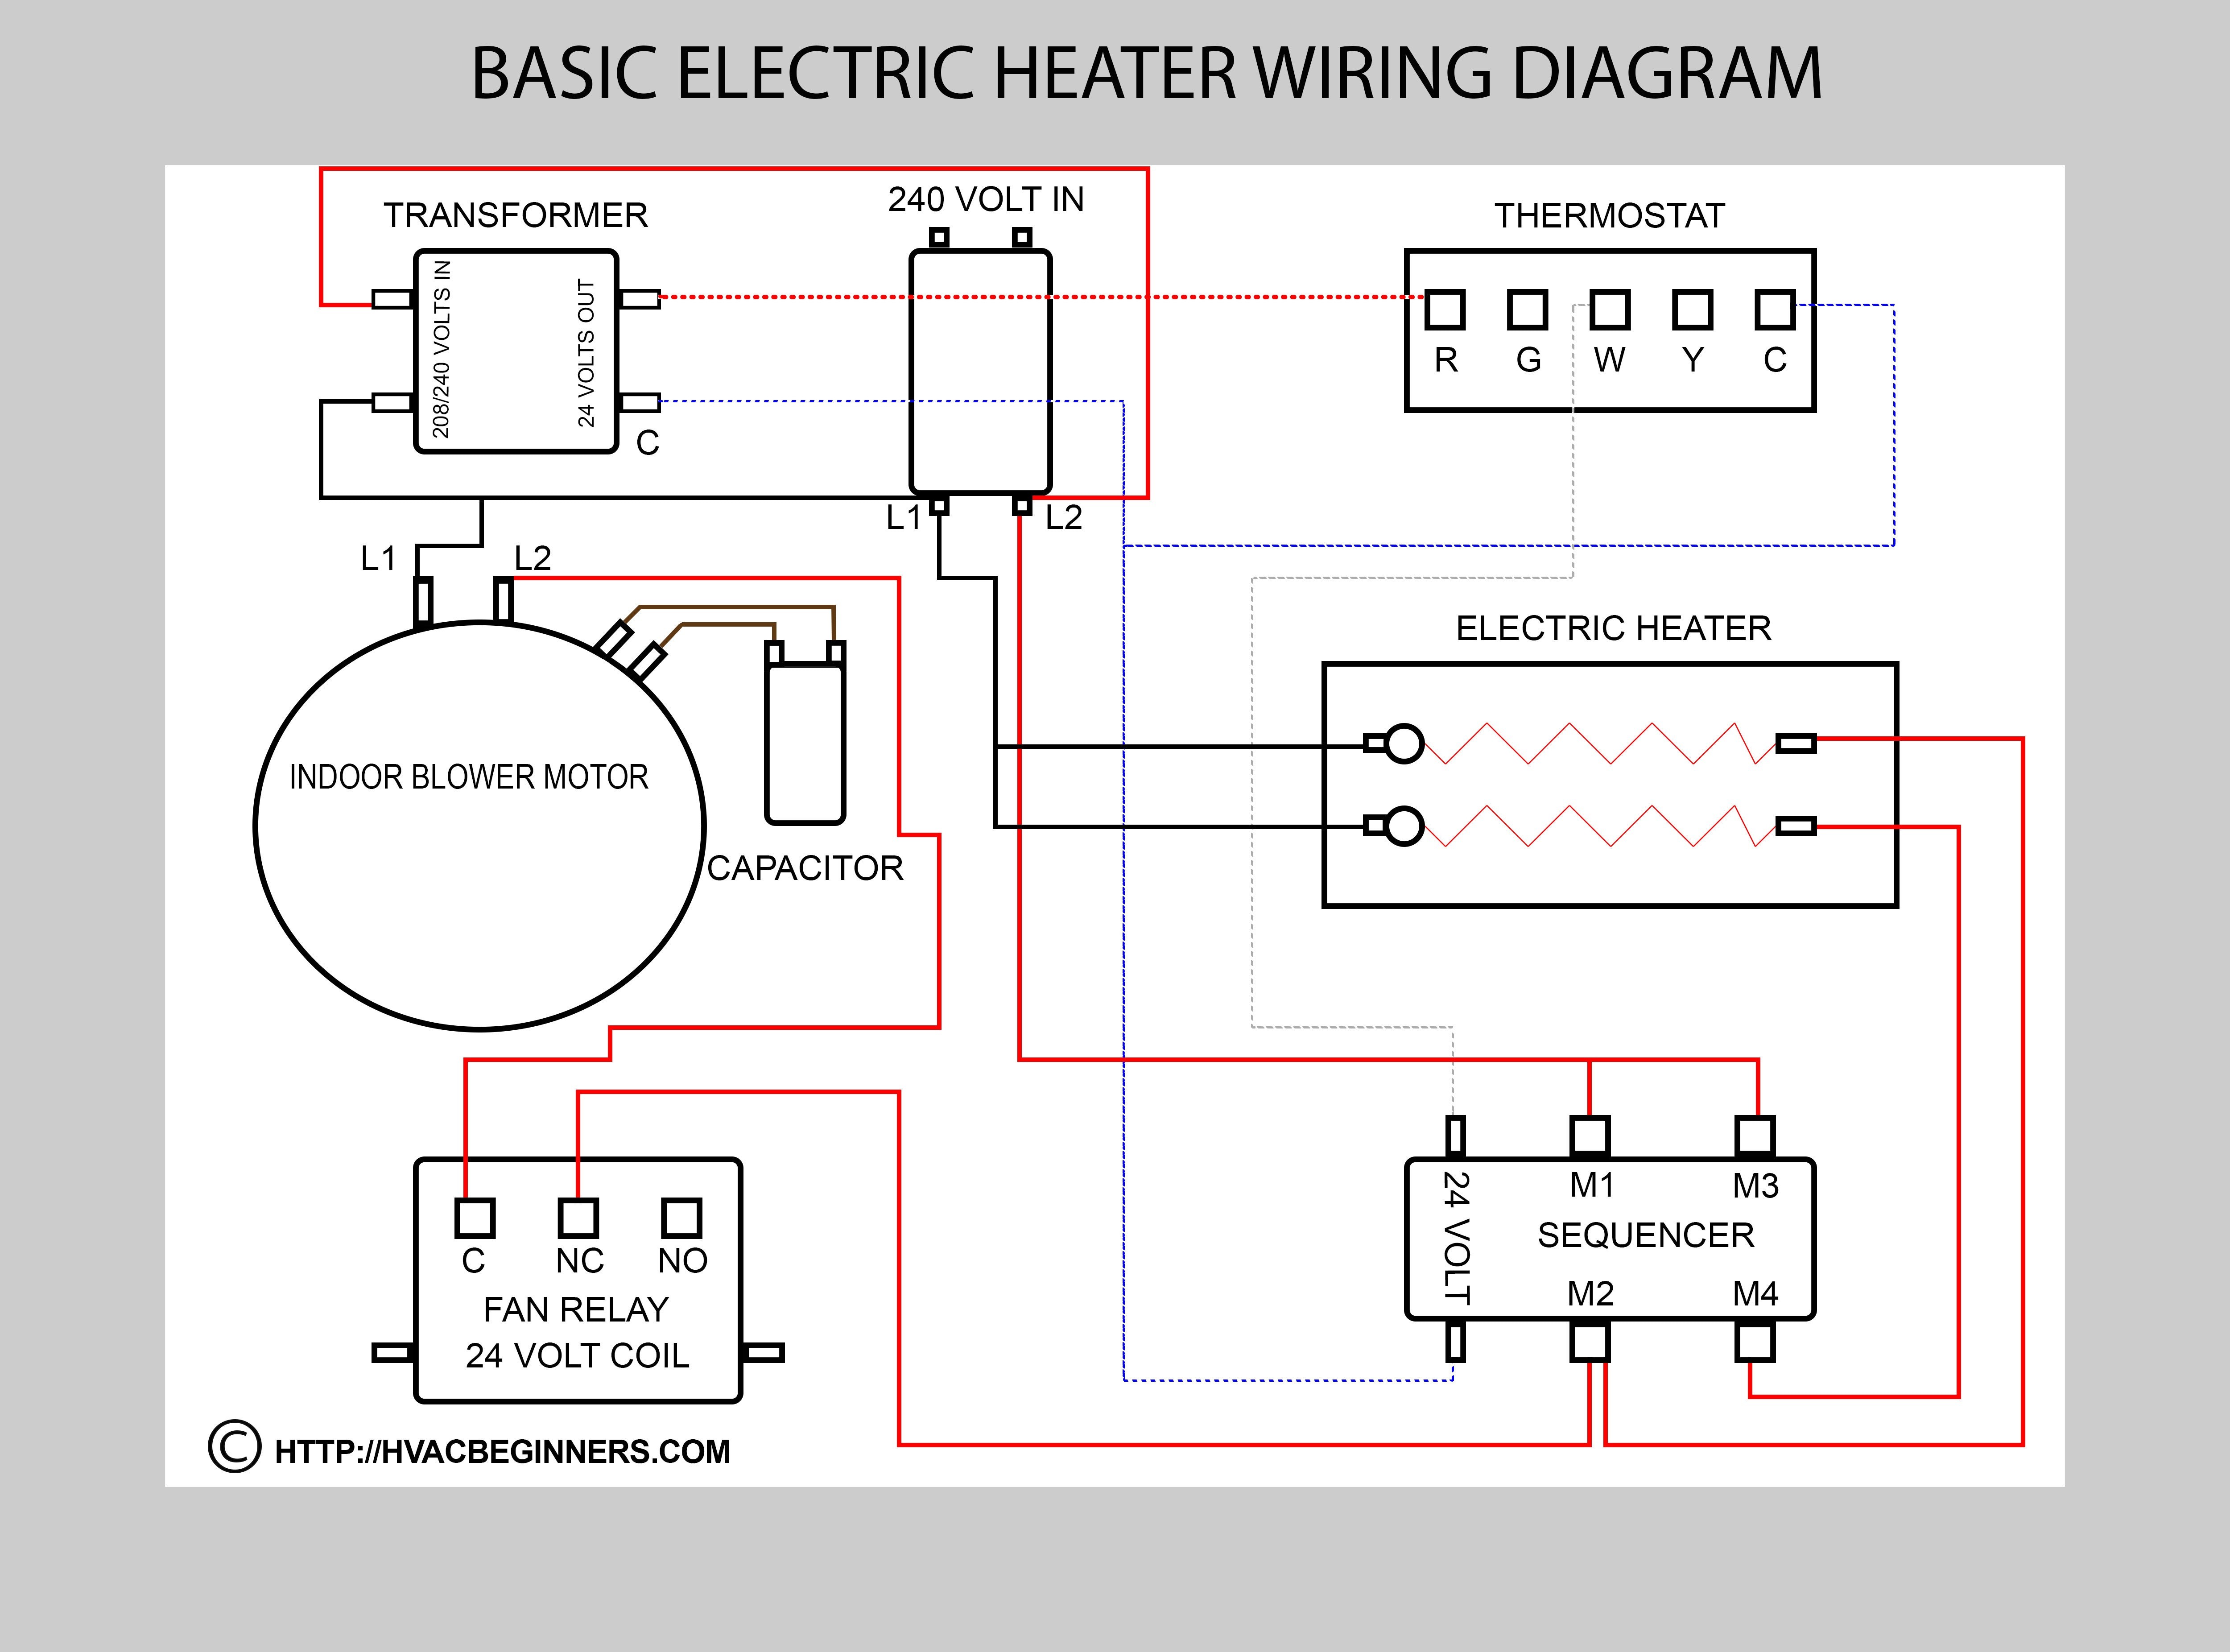 Wiring Diagram Overcurrent Relay Best Split System Air Conditioner Wiring Diagram Hvac Wire Central and